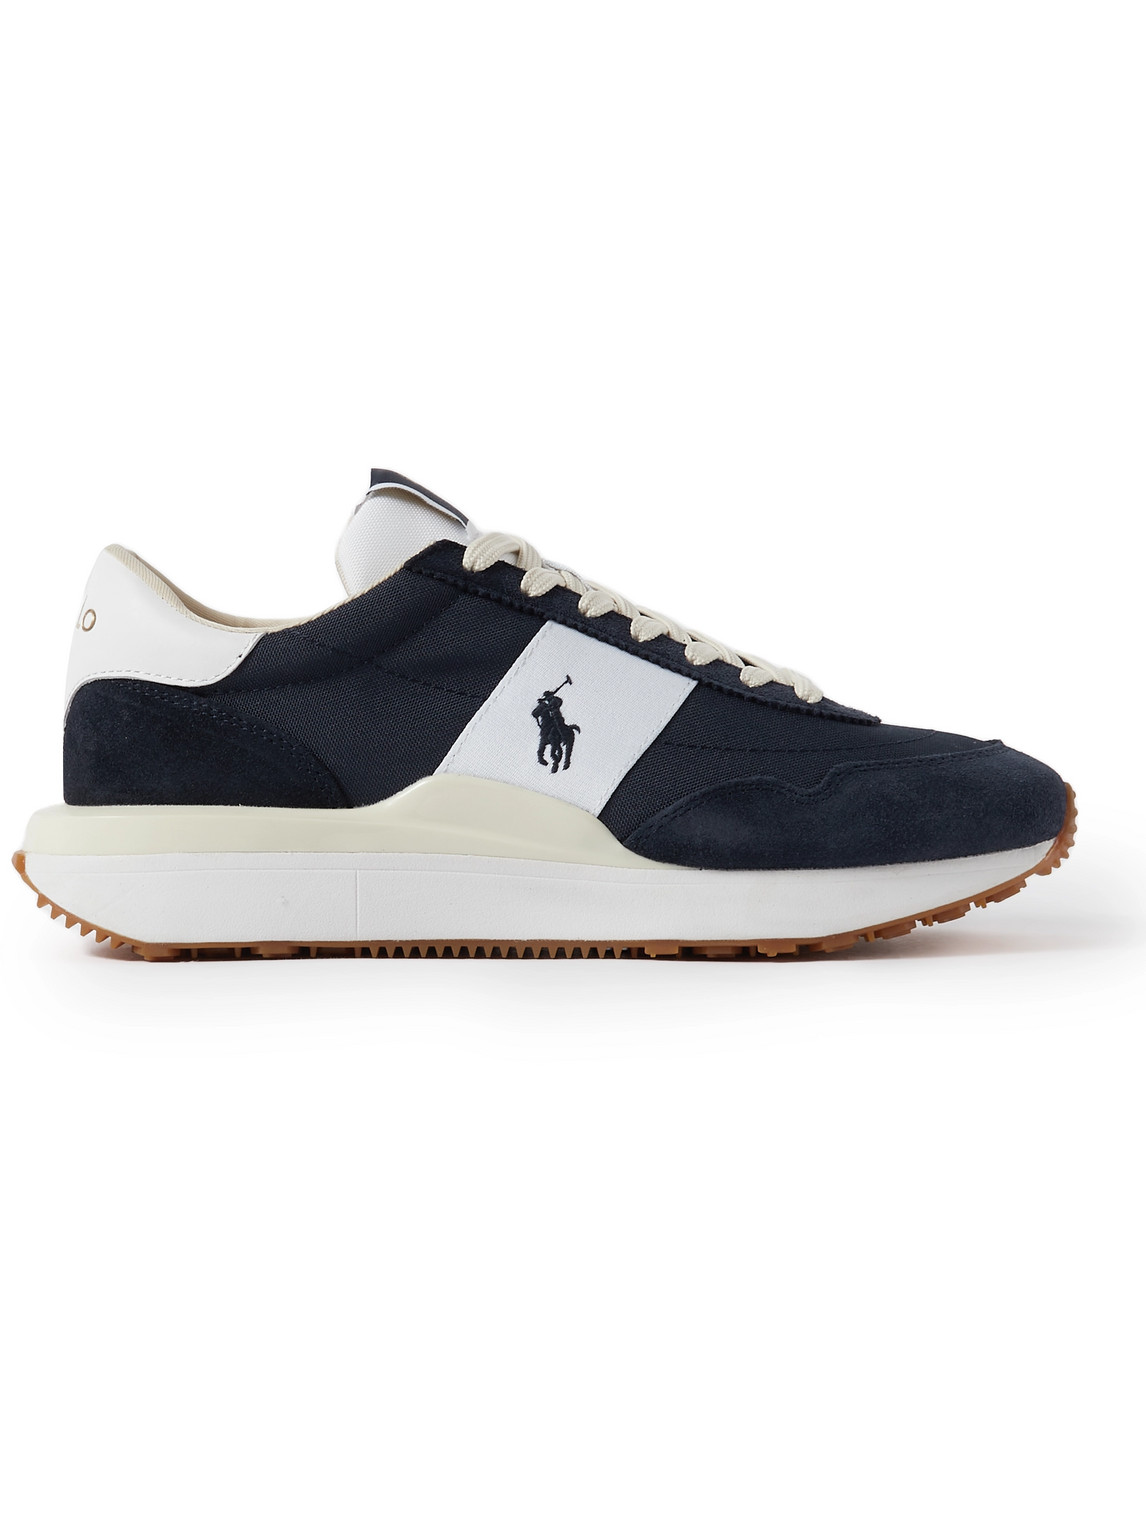 POLO RALPH LAUREN TRAIN 89 RUBBER-TRIMMED, SUEDE AND MESH SNEAKERS